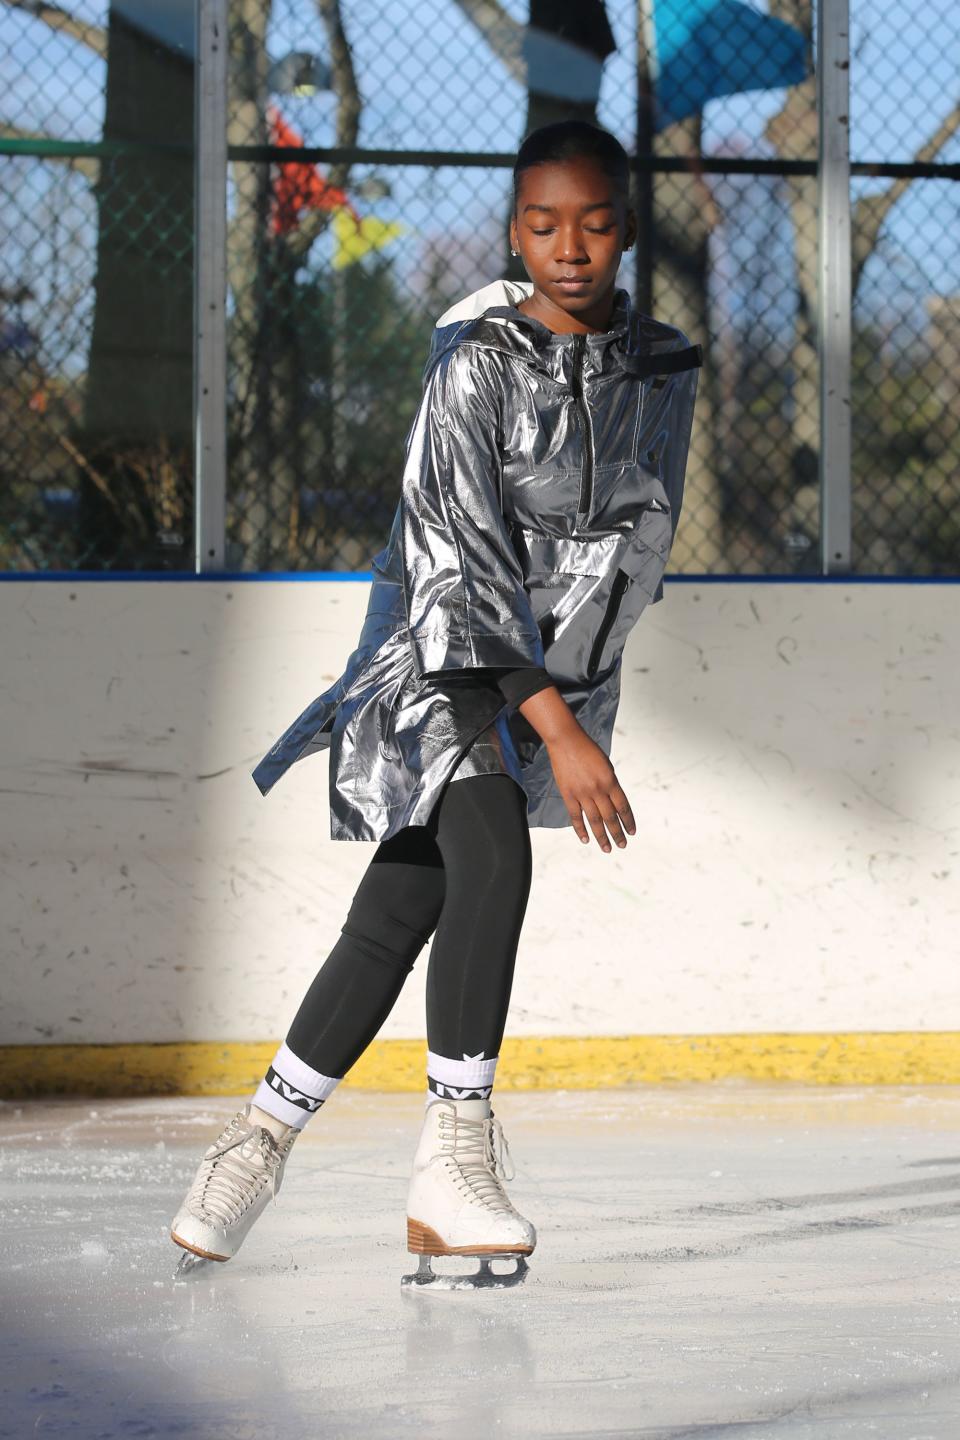 It’s blades of glory, Beyhive style.